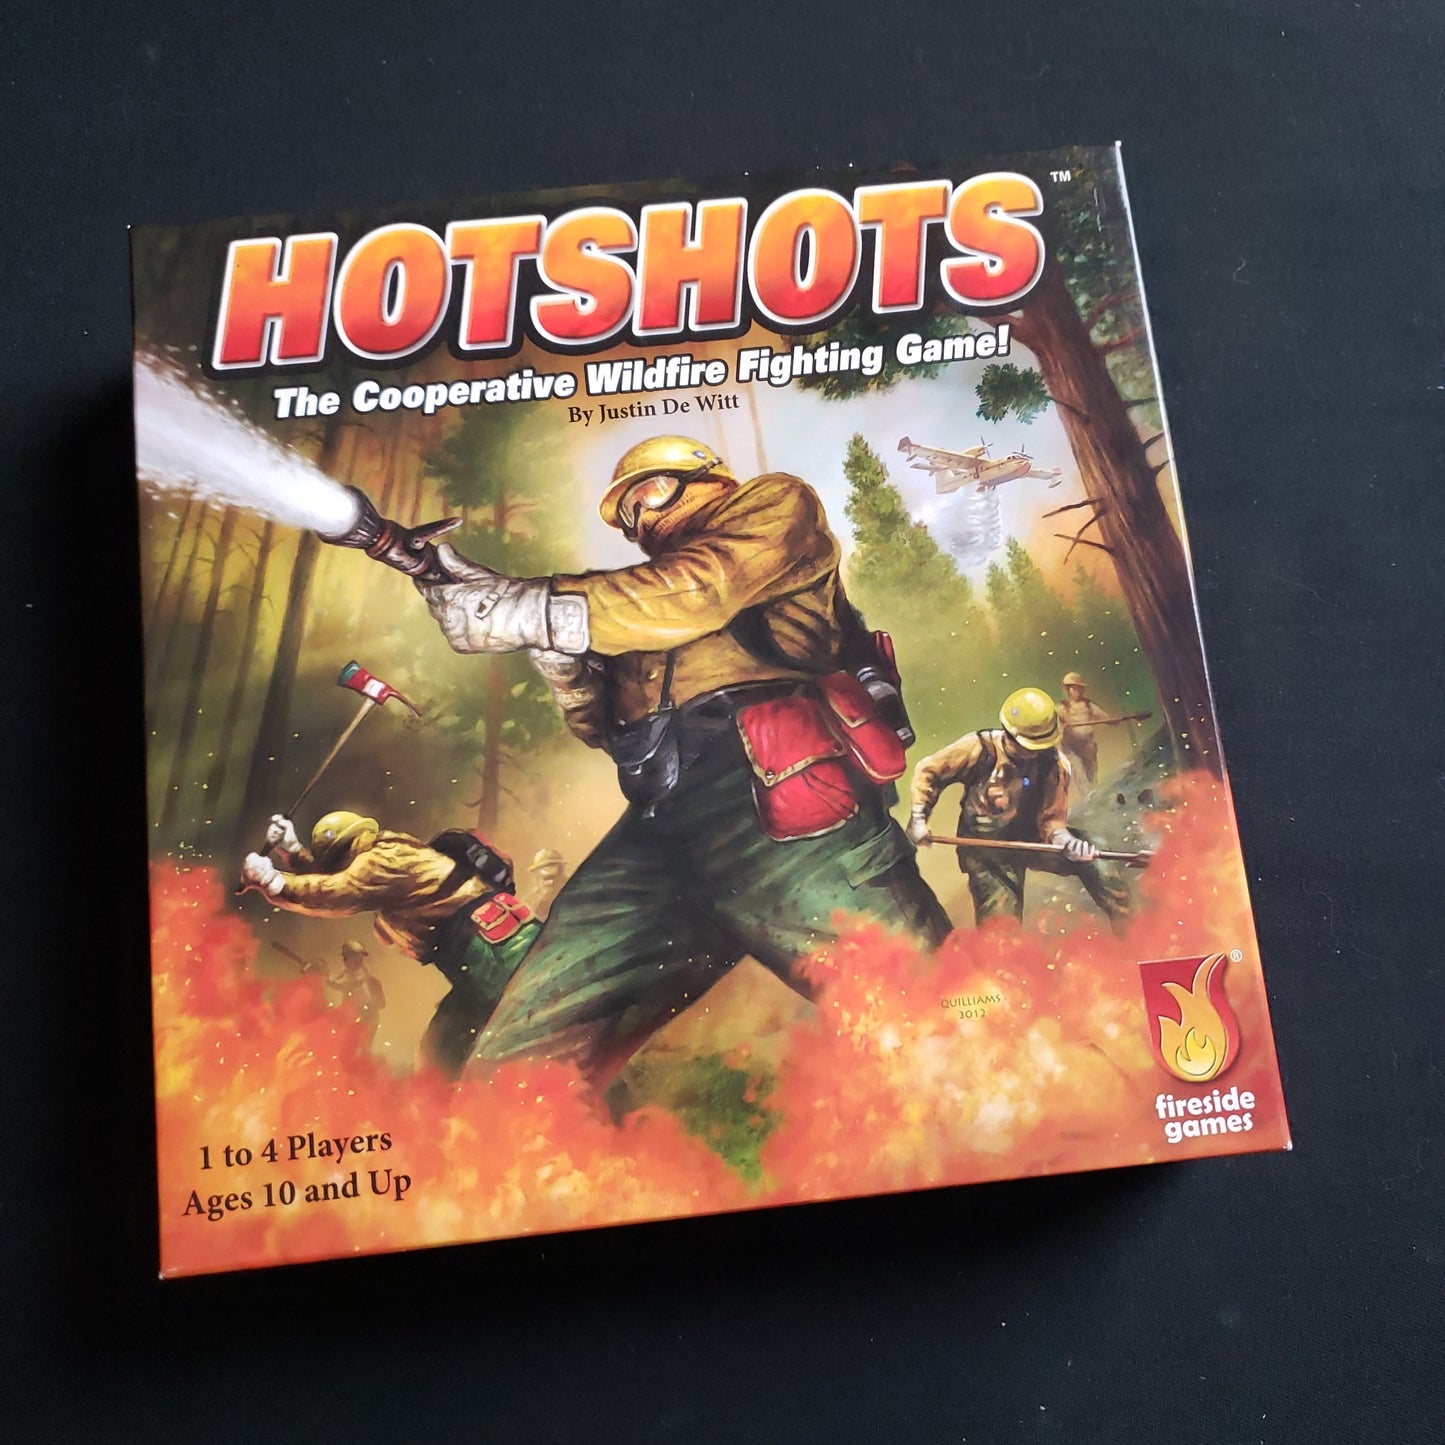 Image shows the front cover of the box of the Hotshots board game